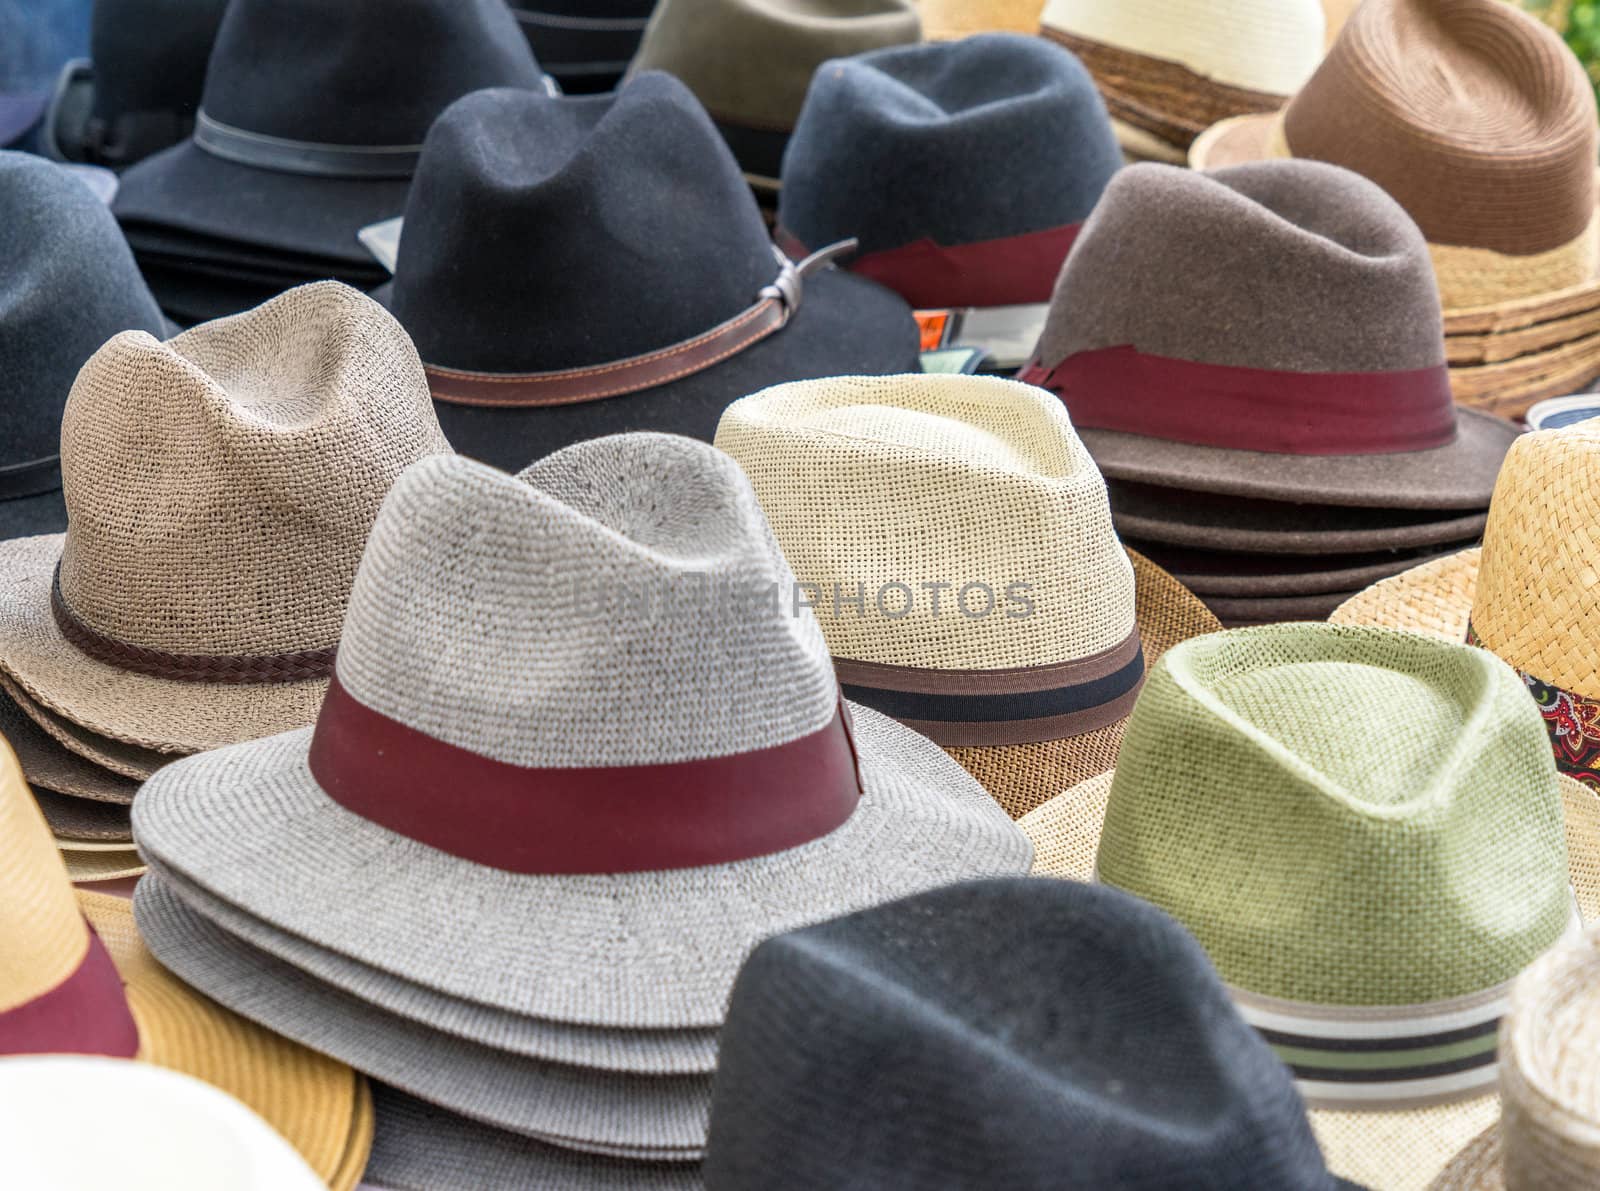 Many hats for men in different shapes and colors in one display for sale by geogif